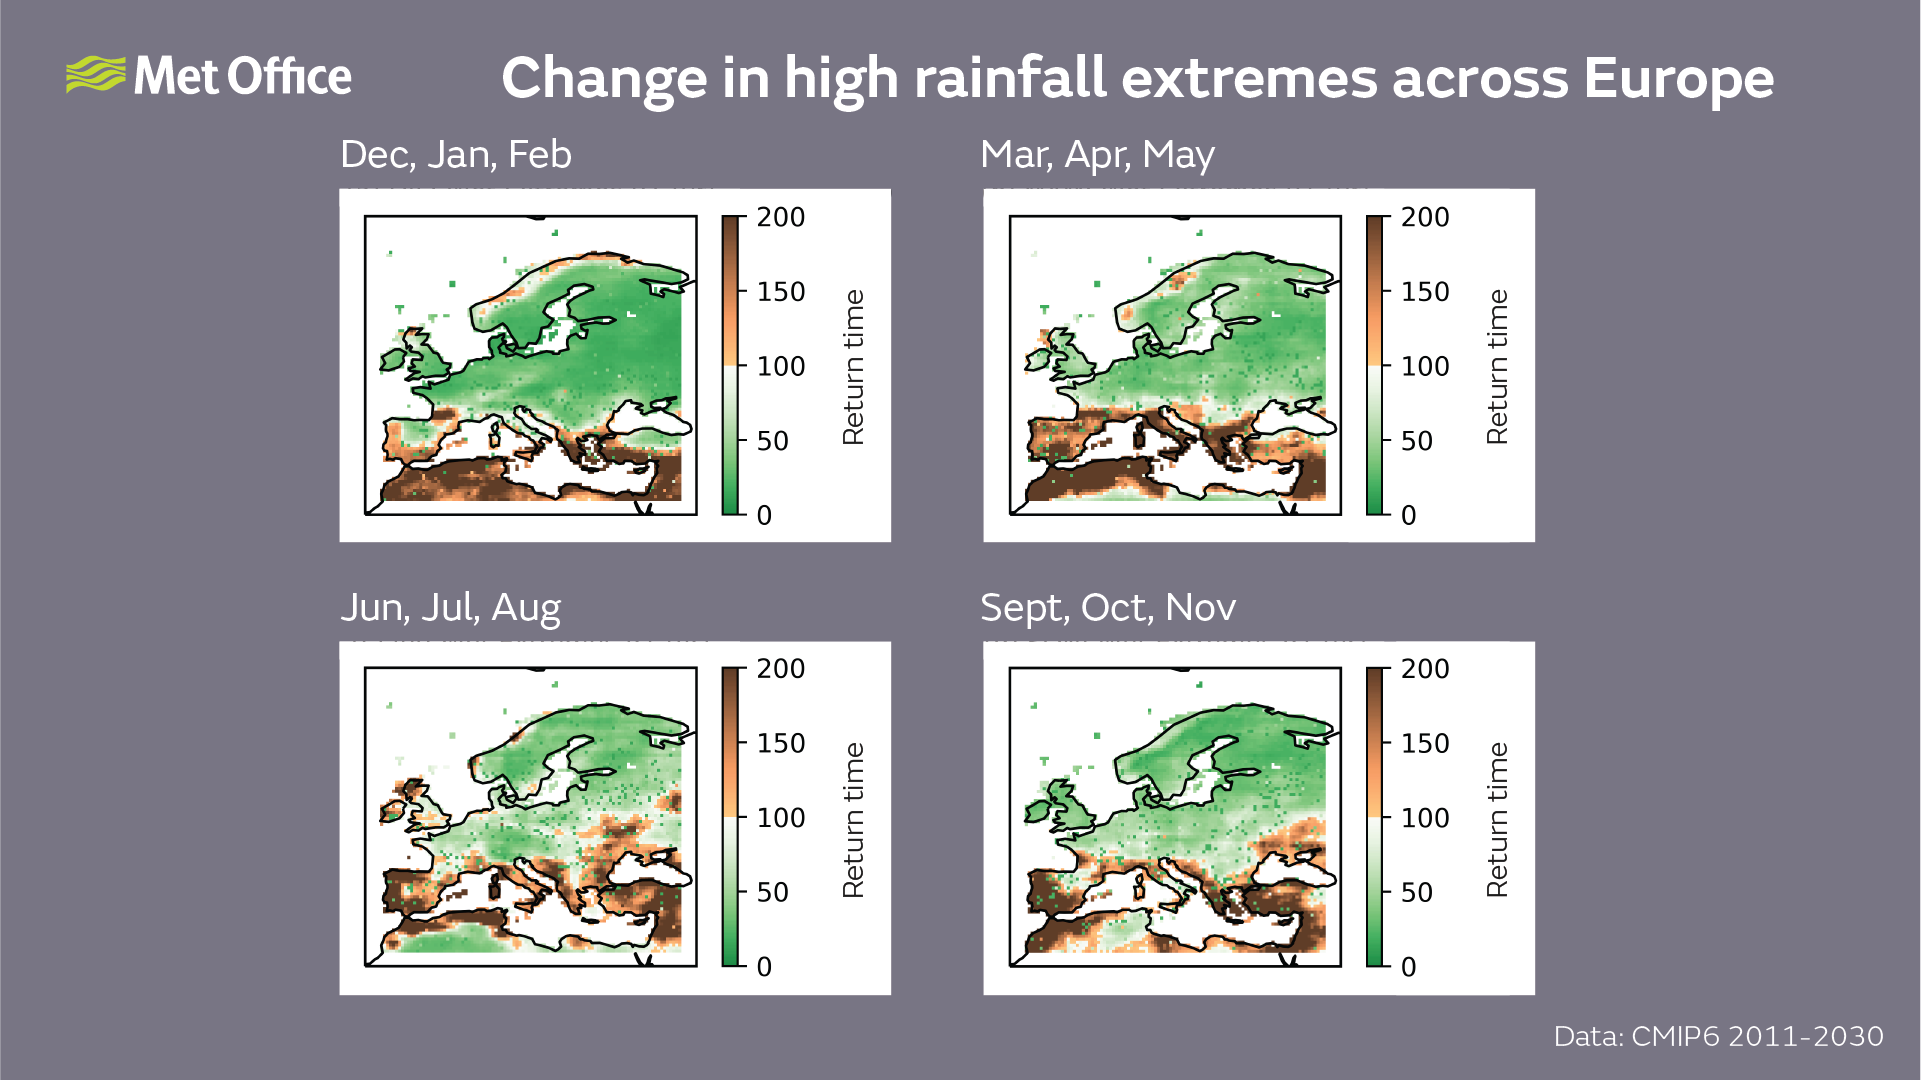 Maps showing an increasing risk of extremely dry seasons in the Mediterranean and extremely wet seasons elsewhere in Europe, which can lead to major impacts such as droughts and floods. In the maps green colours indicate an increase in the likelihood of extremely high seasonal rainfall events and brown colours a decrease.